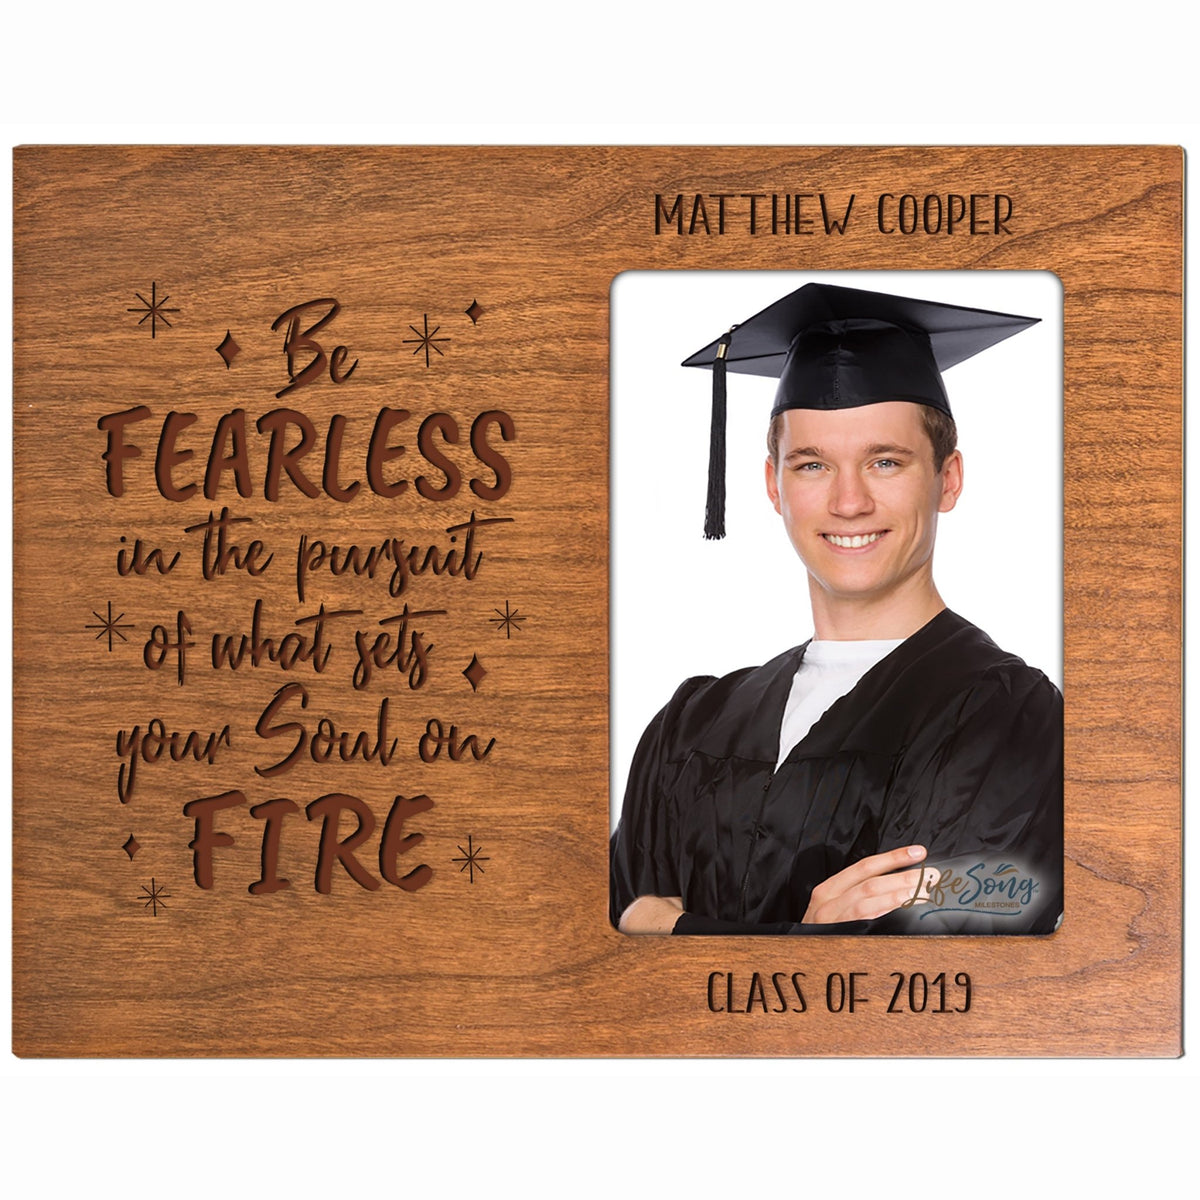 Personalized 8x10 Graduation Vertical Photo Frame Gift - Be Fearless - LifeSong Milestones